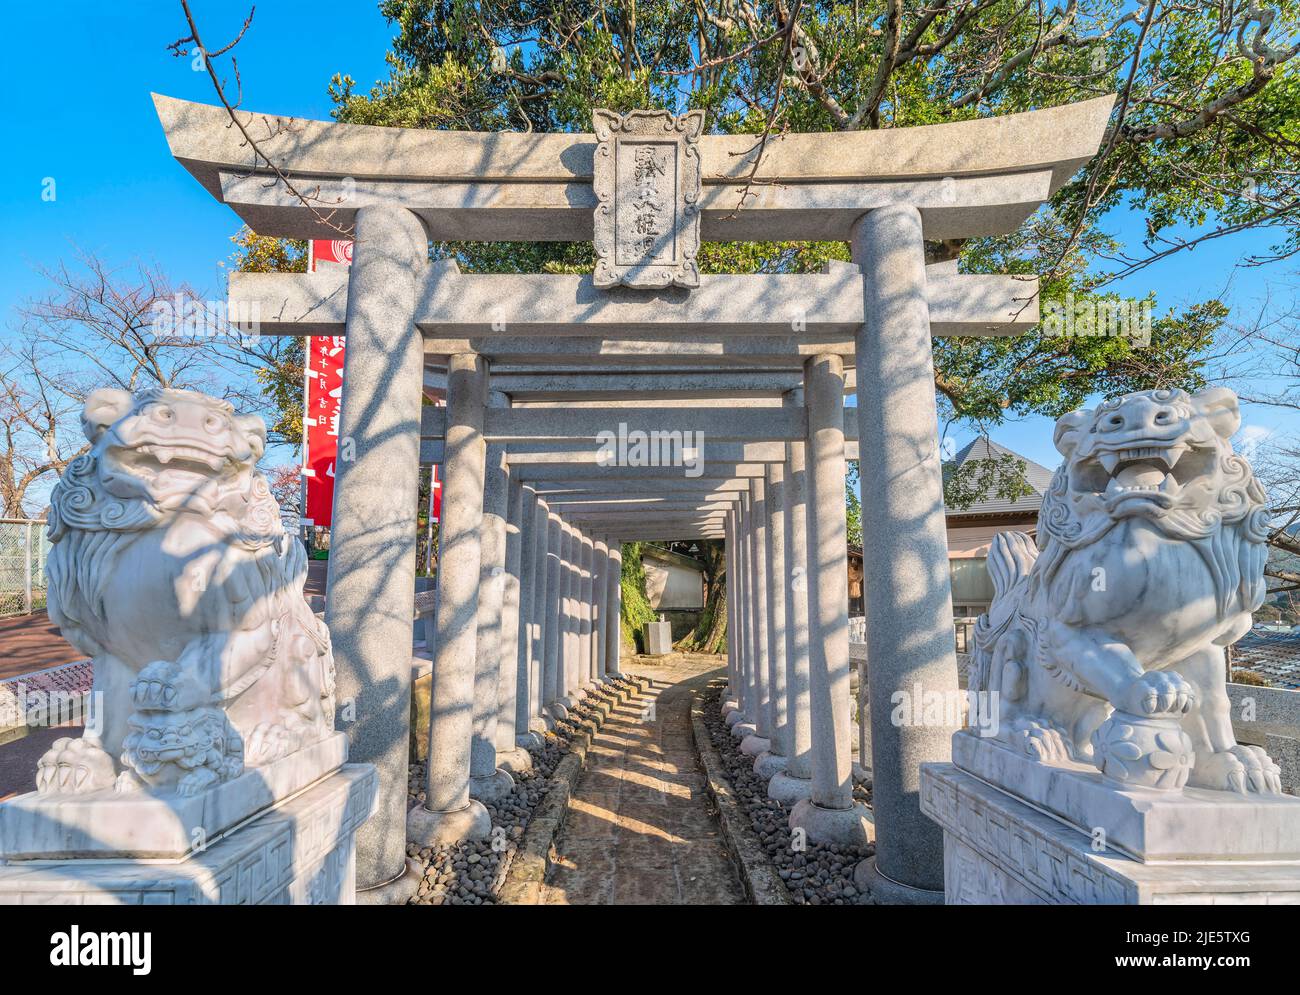 nagasaki, kyushu - december 14 2021: Marble statues of komainu lions in front of a tunnel of a dozen of torii gates leading to the Japanese buddhist K Stock Photo